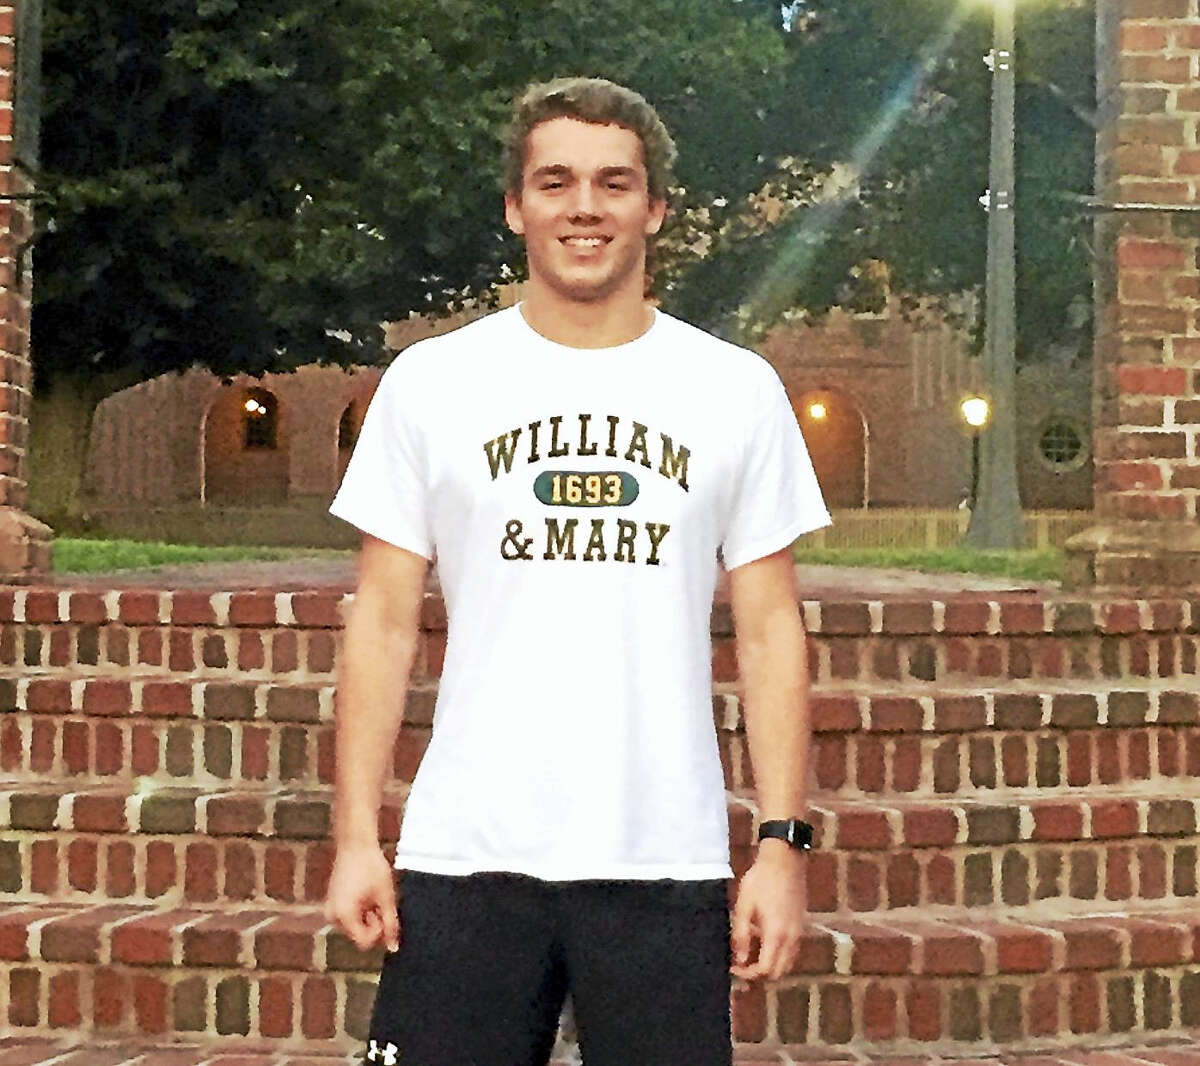 Middletown’s Jack Doherty is enjoying his freshman season with the William and Mary swimming team.